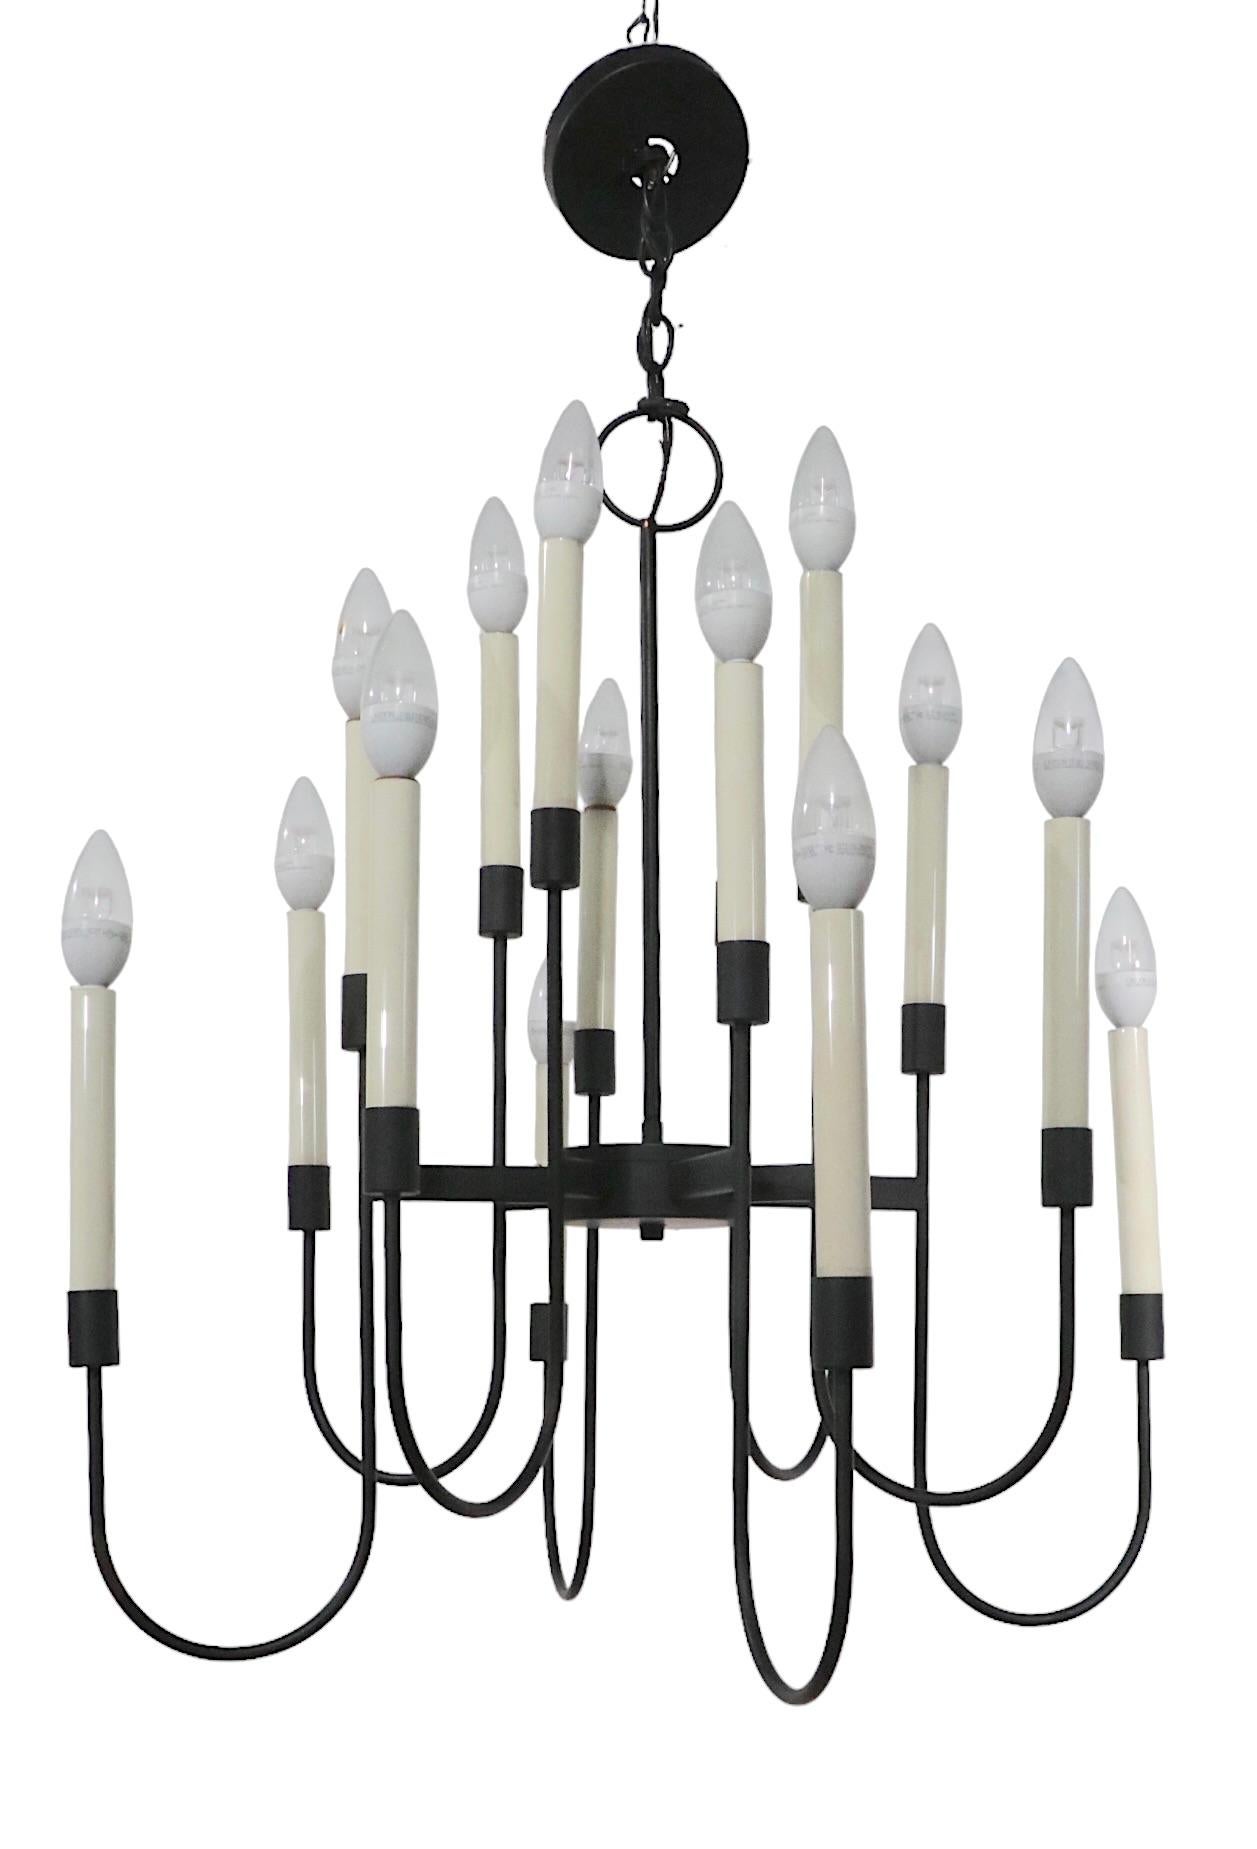 20th Century Sixteen Light Candle Style Chandelier in Black Finished Metal by Lightolier  For Sale